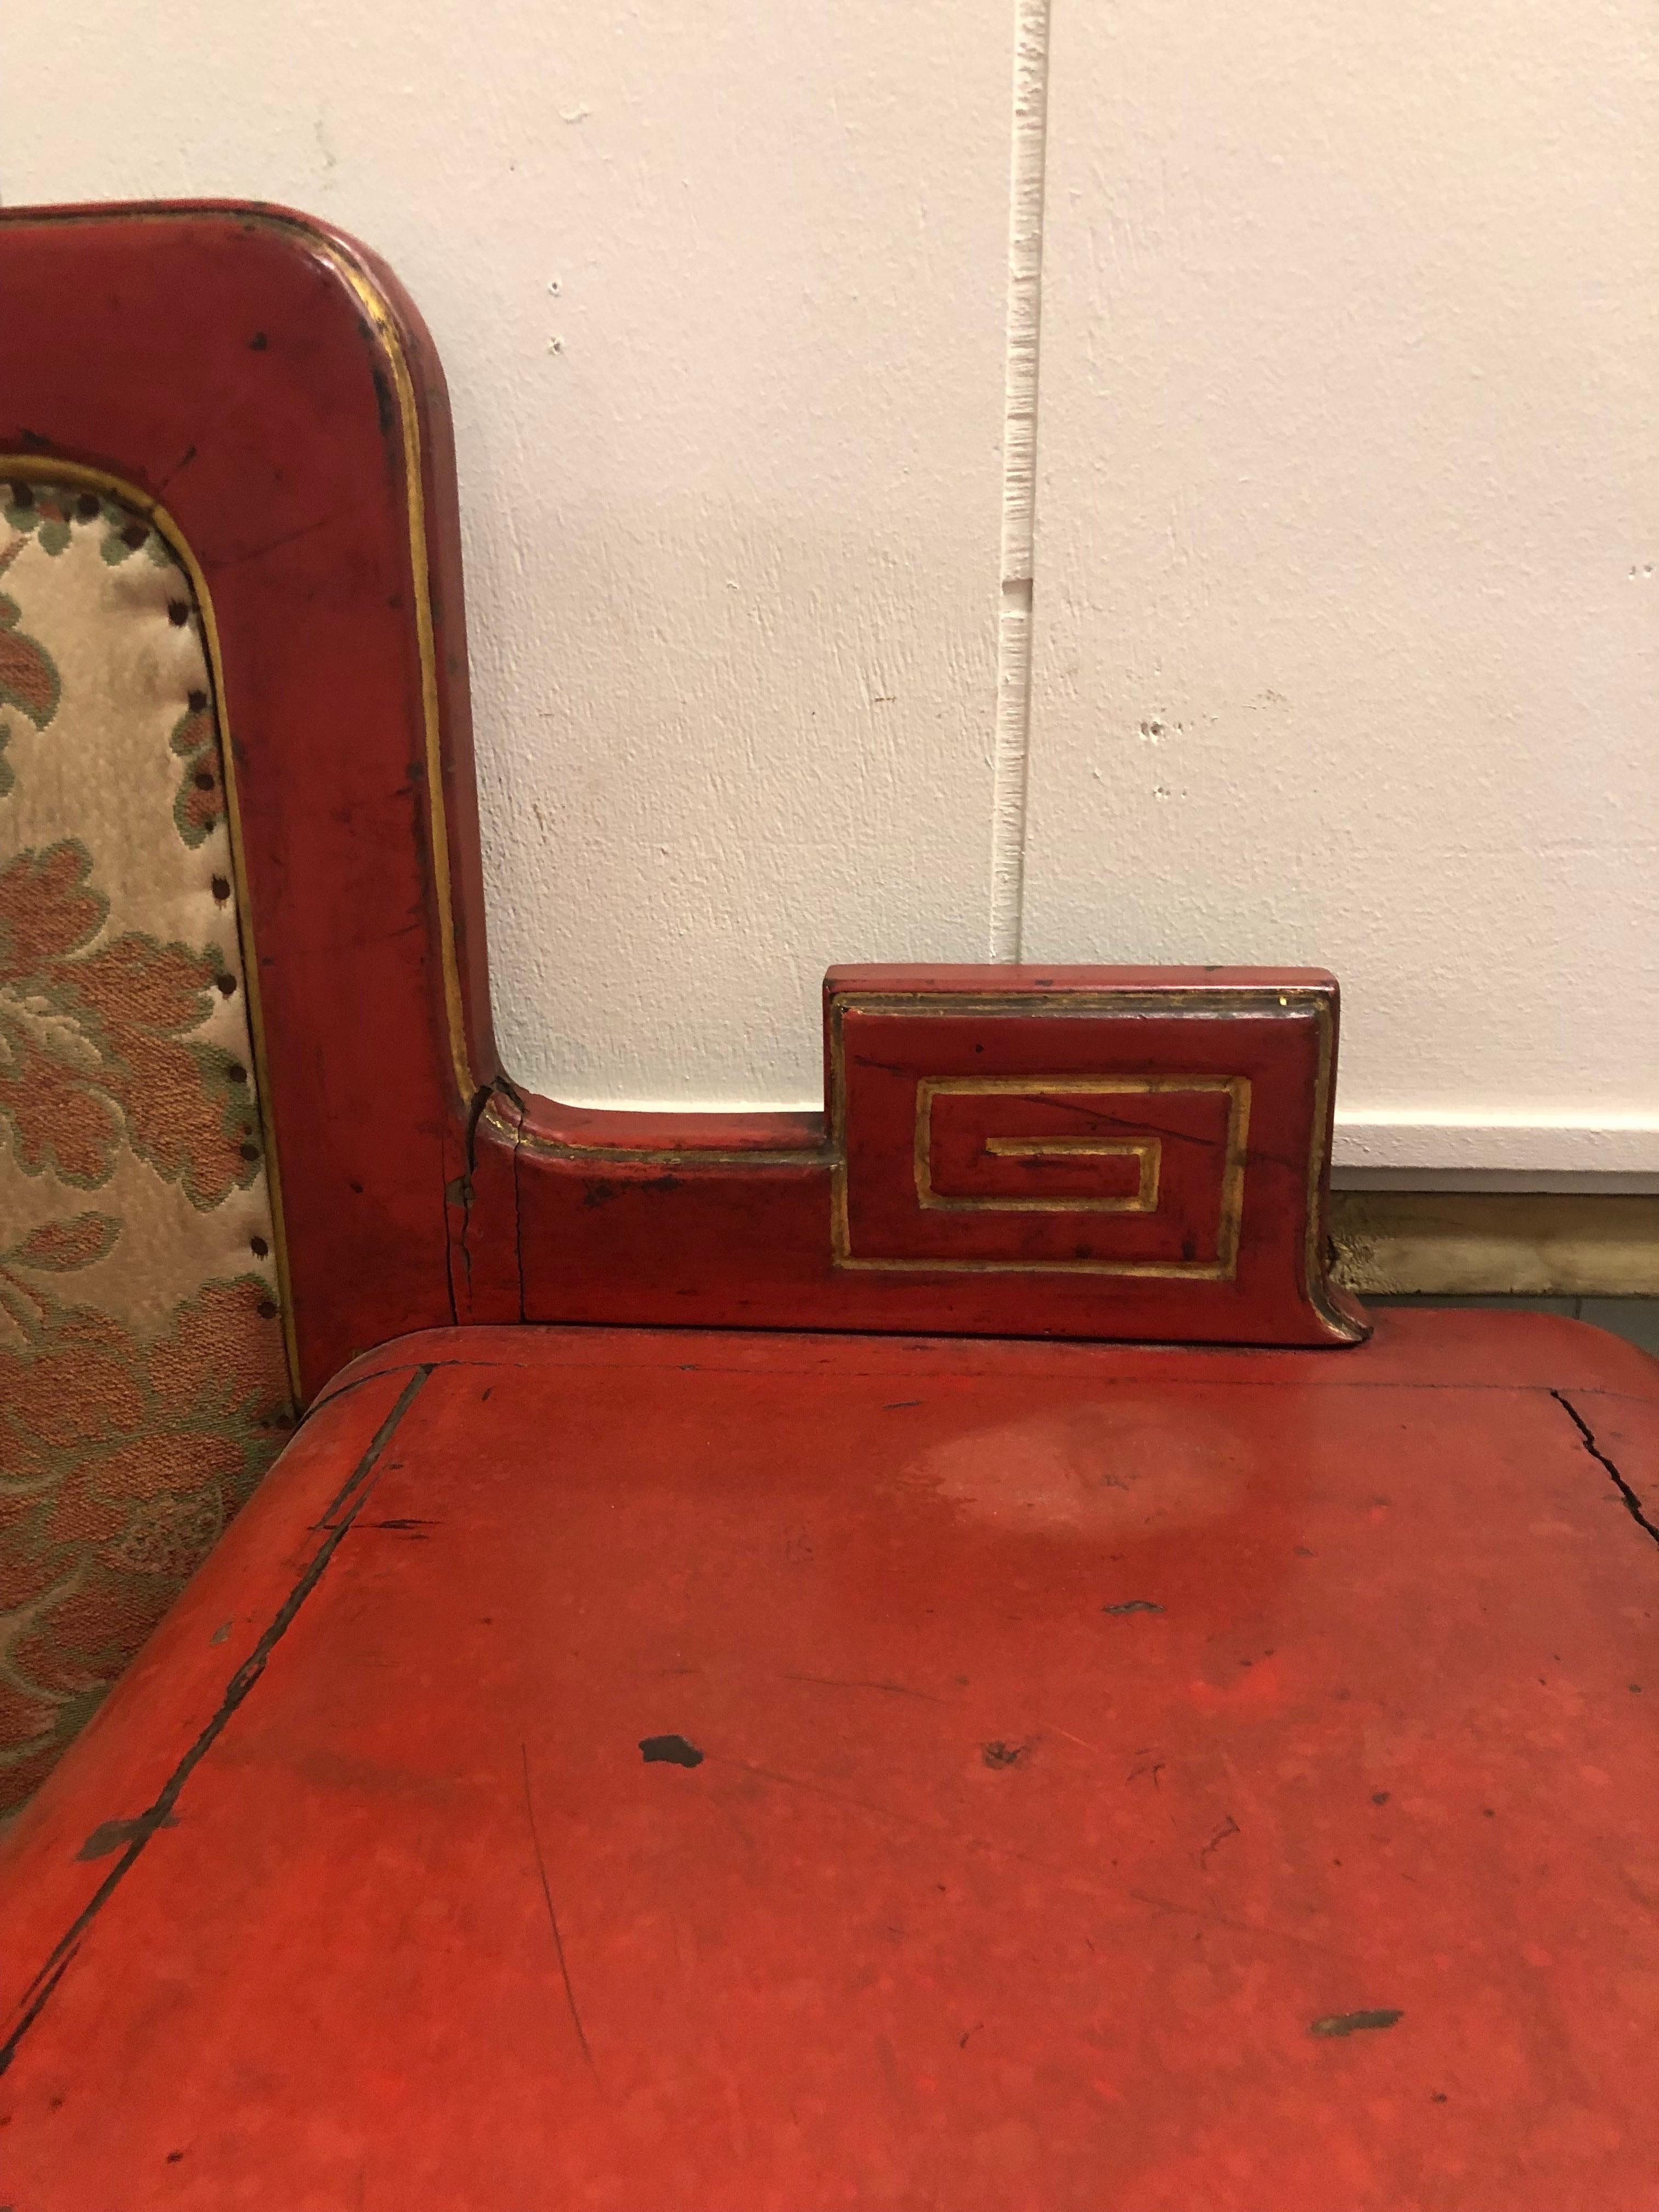 Qing Dynasty Aesthetic Movement Imperial Red Lacquer Sofa / Bench, 19th Century In Good Condition For Sale In Charleston, SC